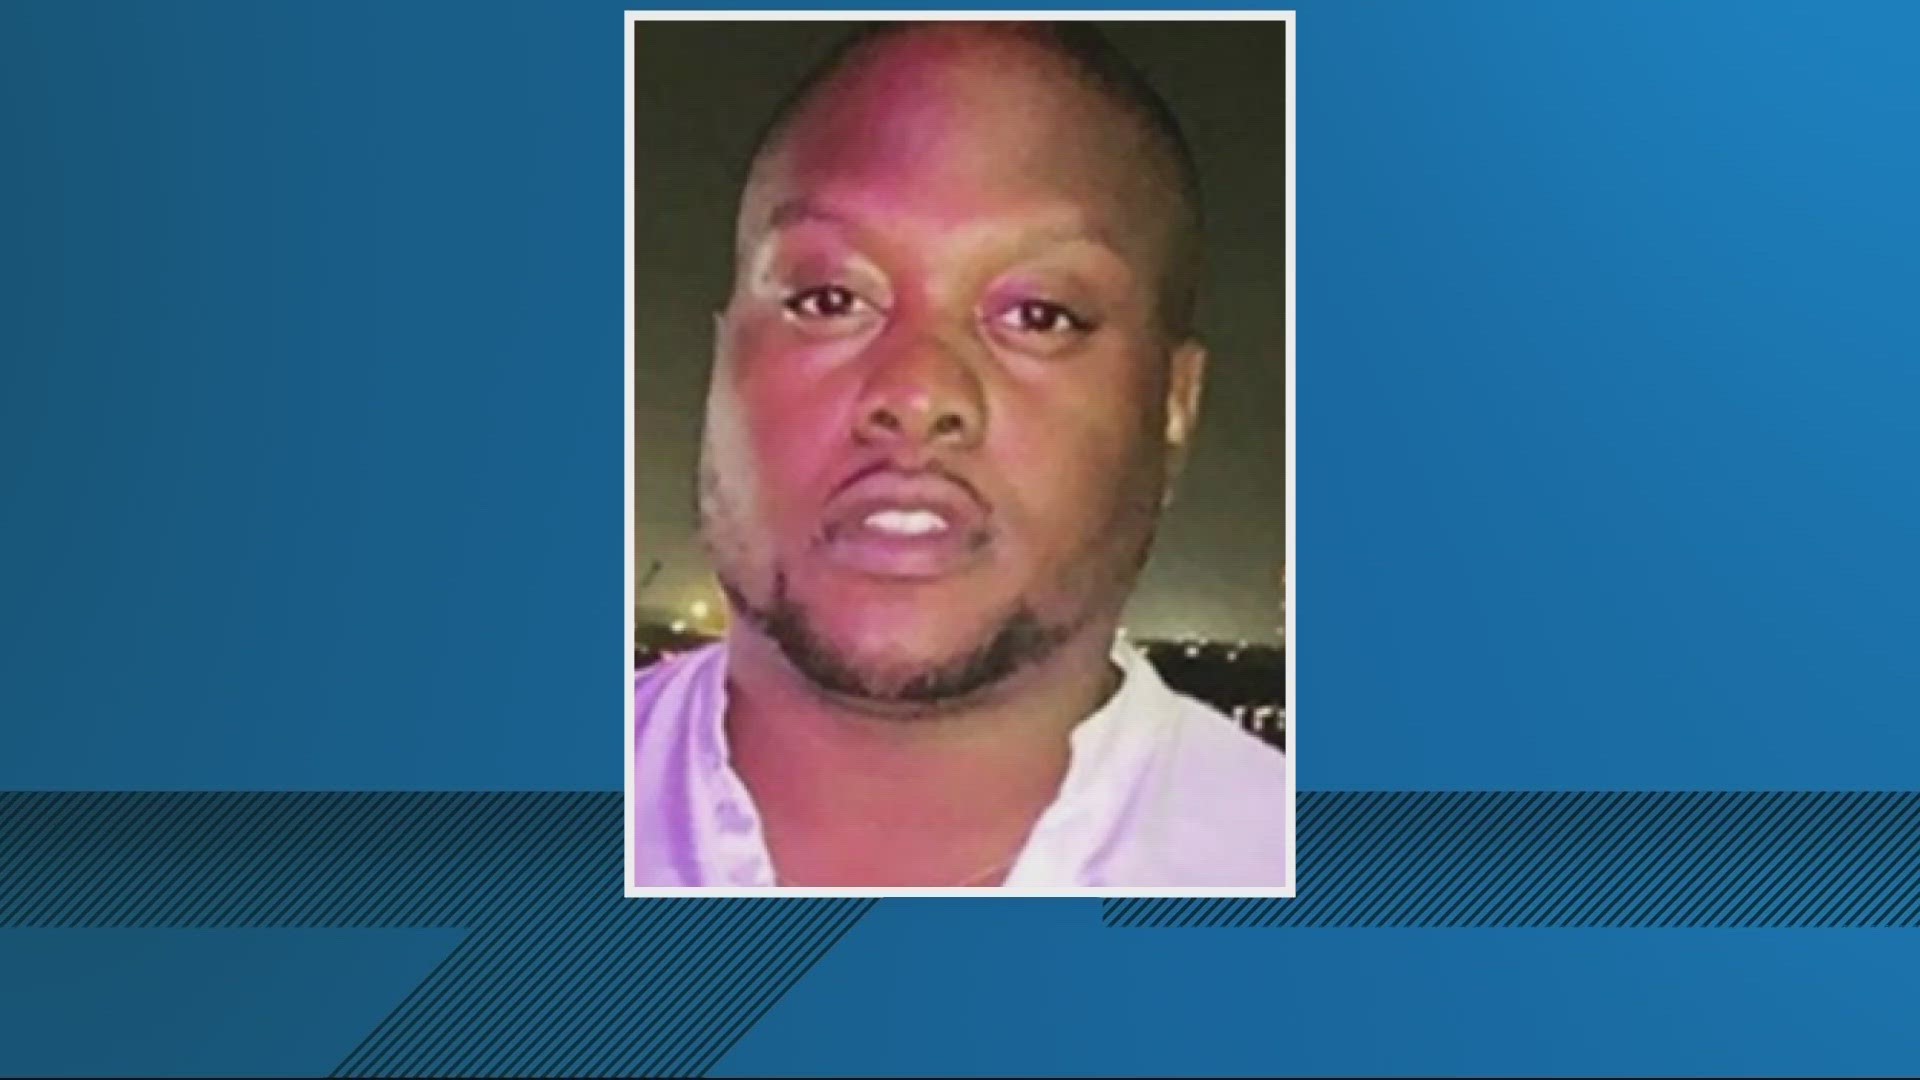 Jacksonville Sheriff's Office has identified 30-year-old Sanchez Hughes through human remains found. Hughes went missing in Aug. 2020.